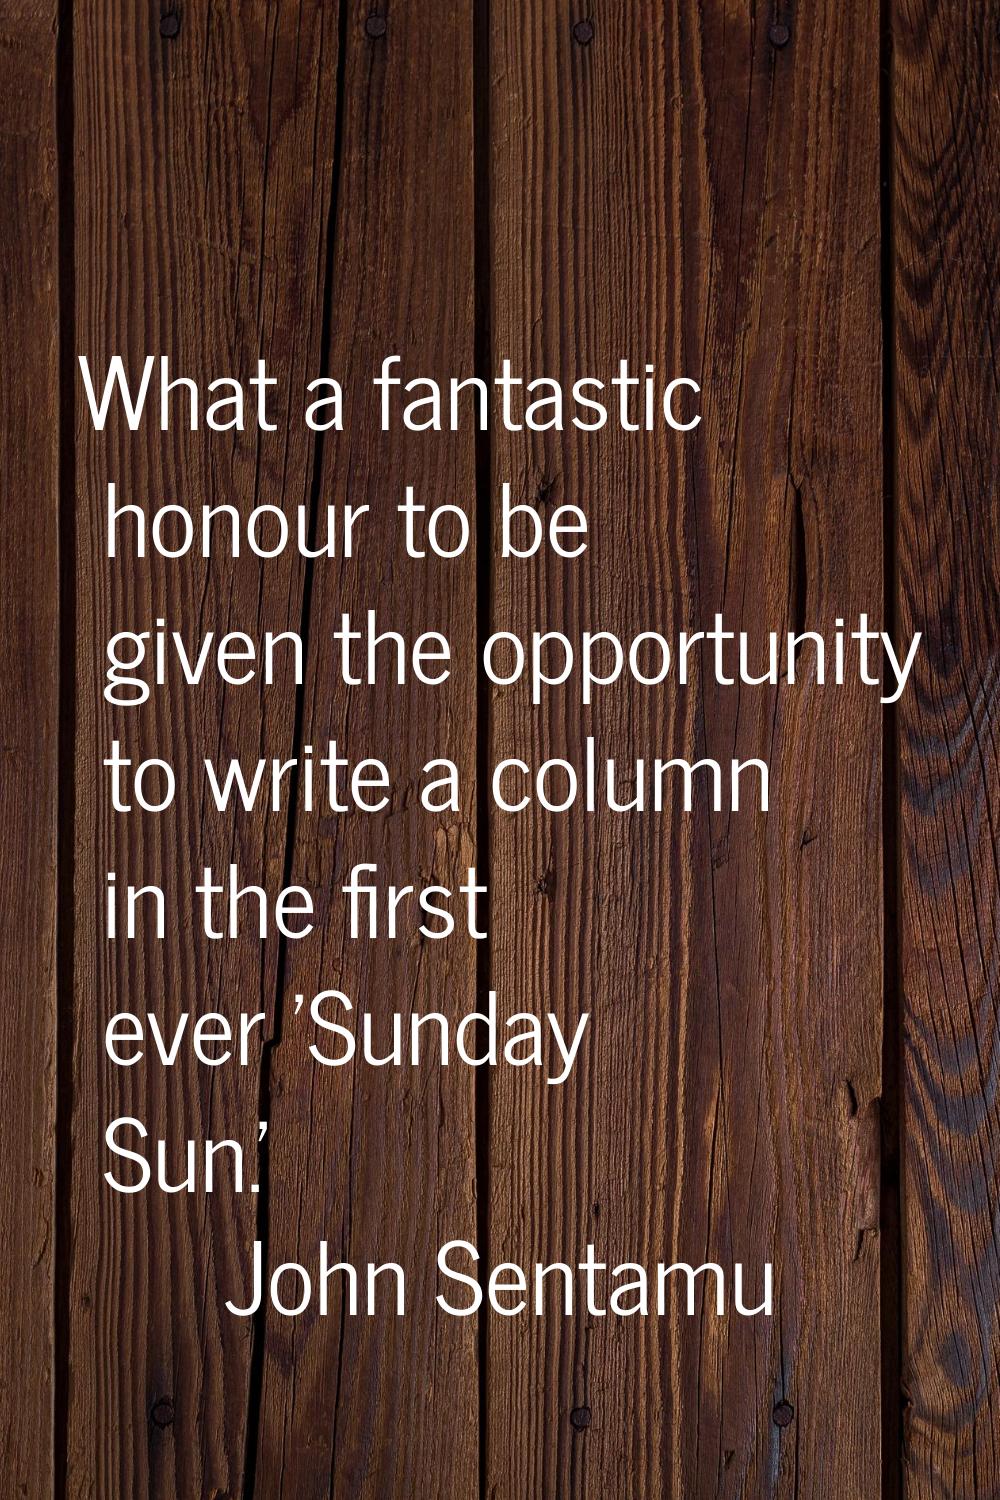 What a fantastic honour to be given the opportunity to write a column in the first ever 'Sunday Sun